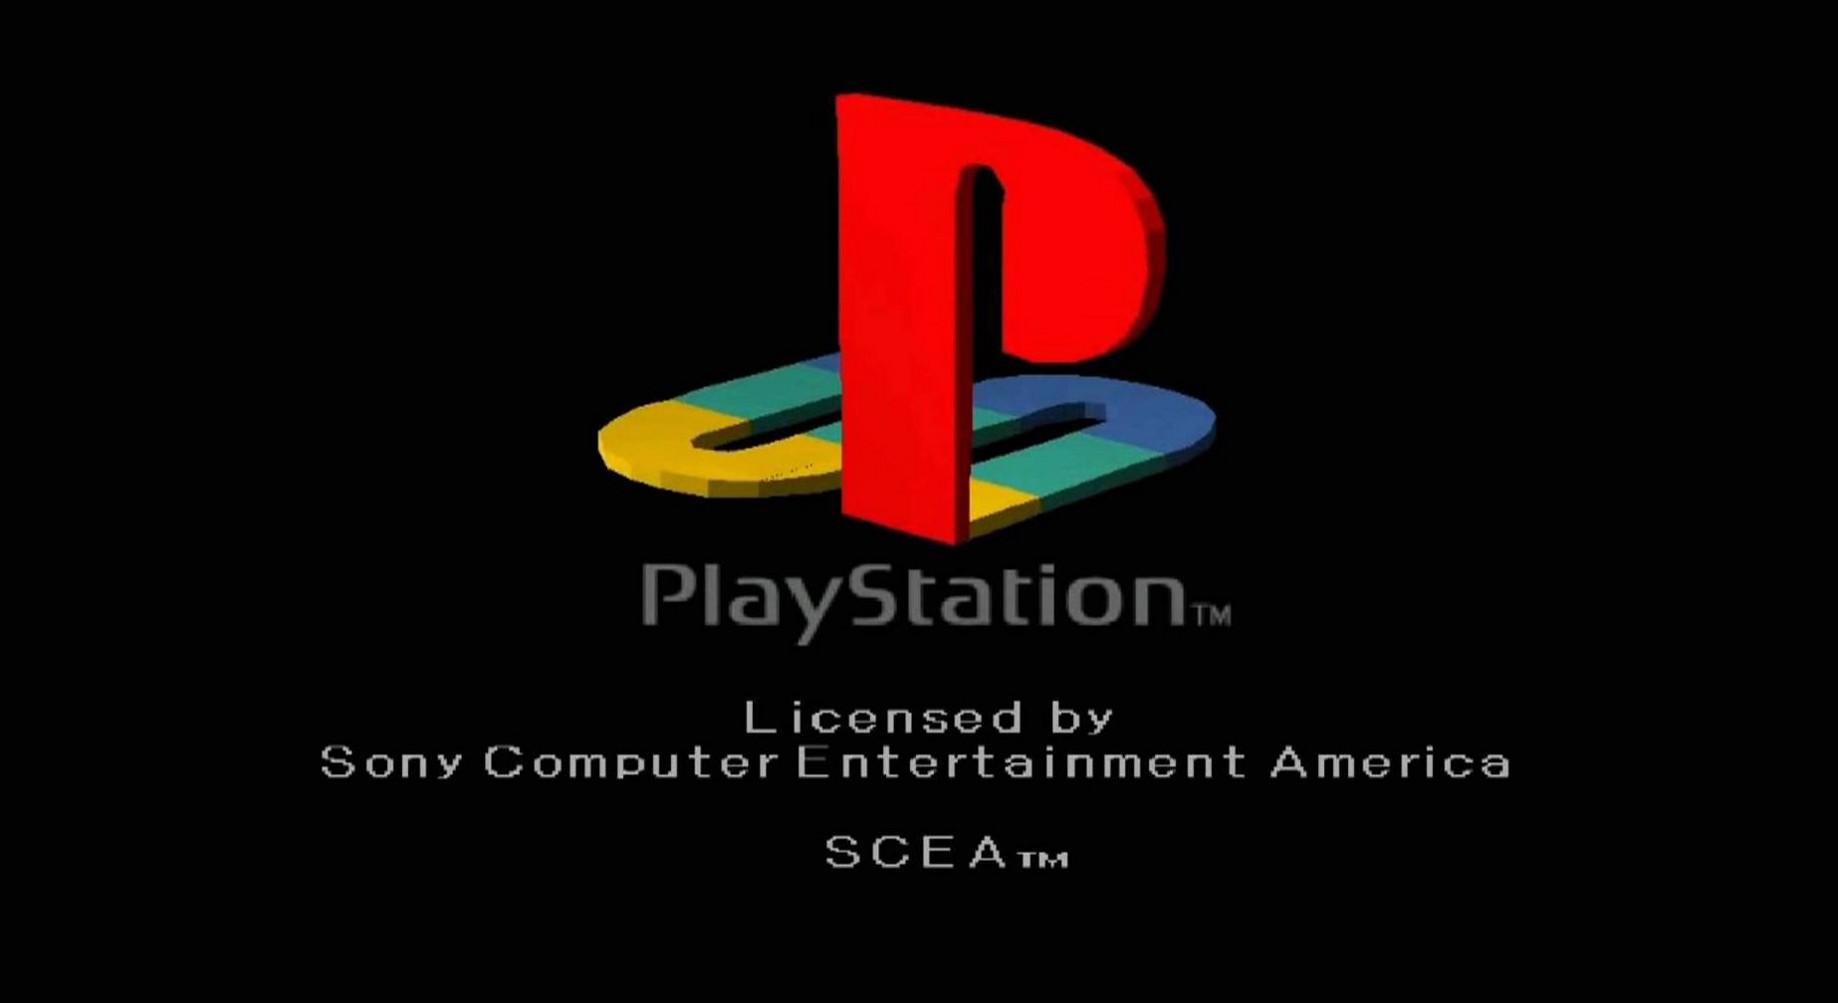 PSOne Logo - Ghosts in the Playstation: The Unsettling Sounds of “Fearful Harmony ...